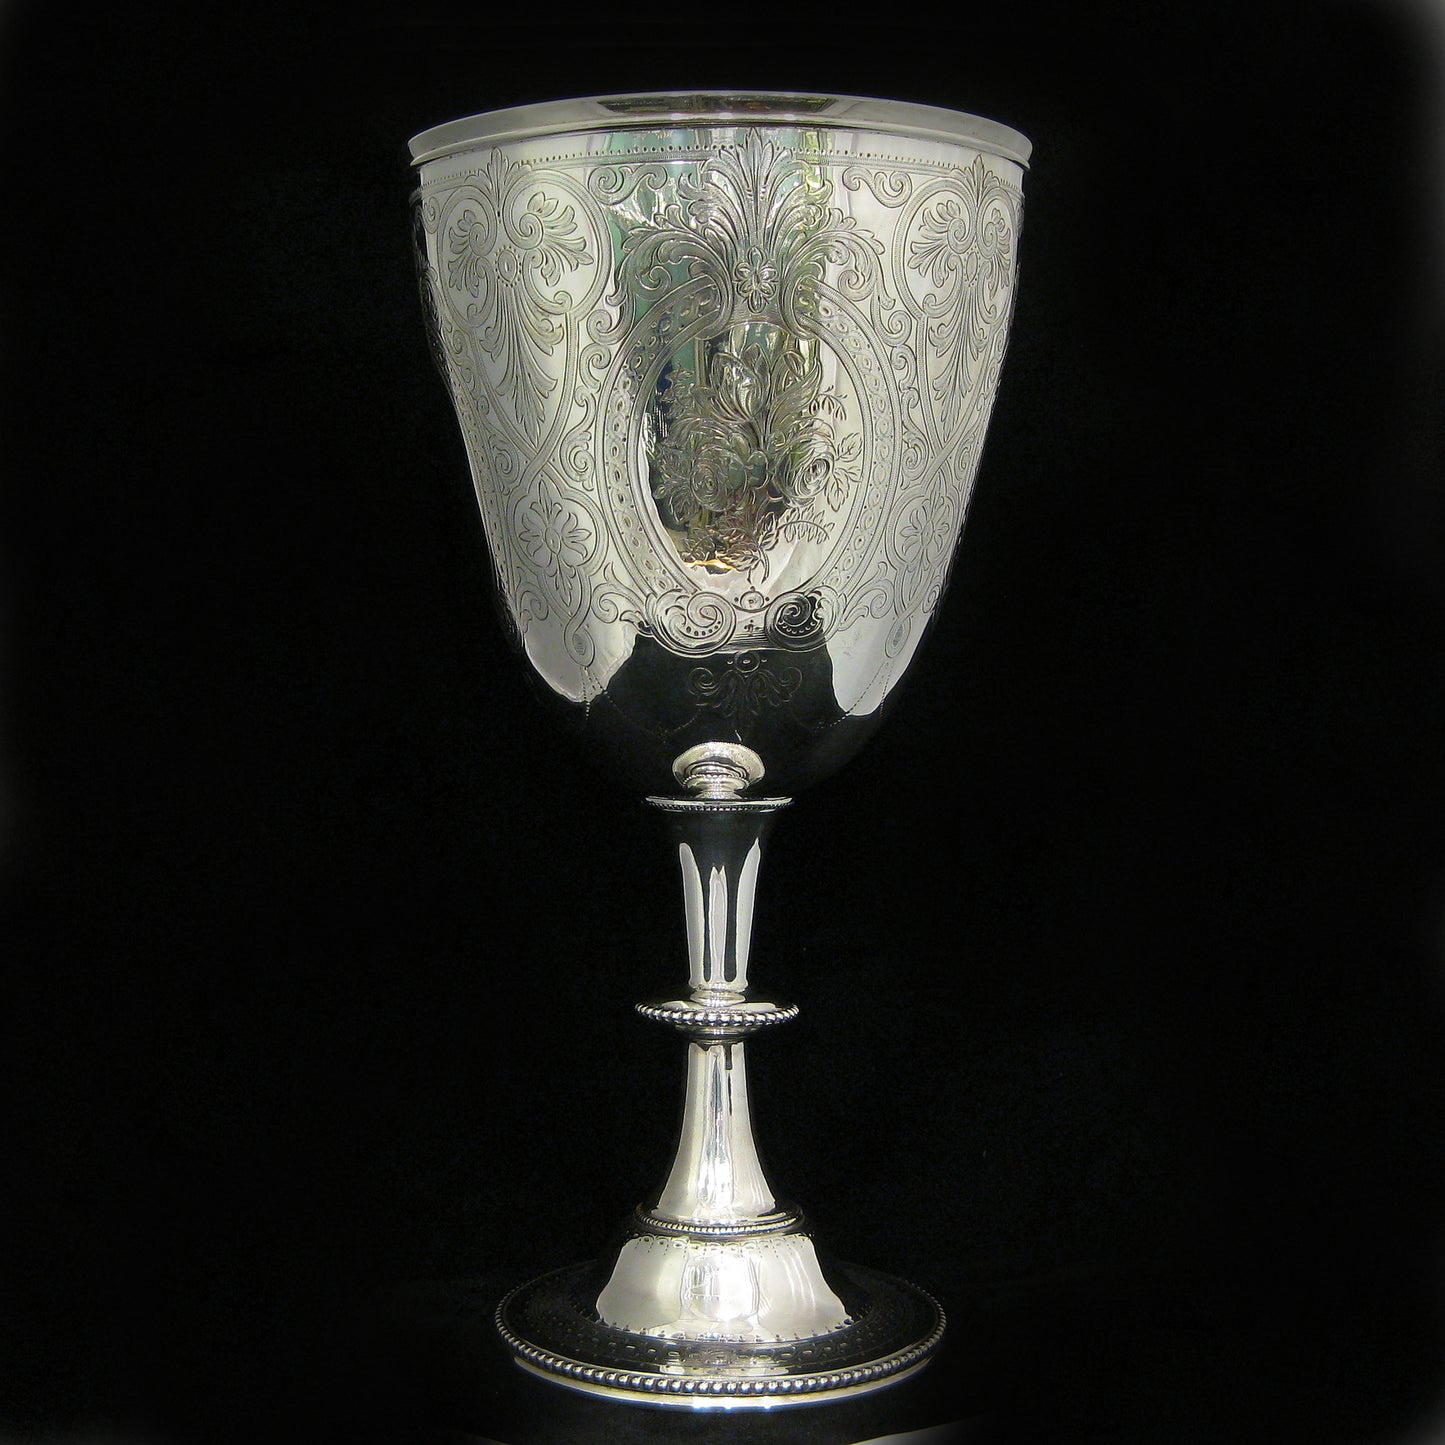 A stunning silver trophy cup